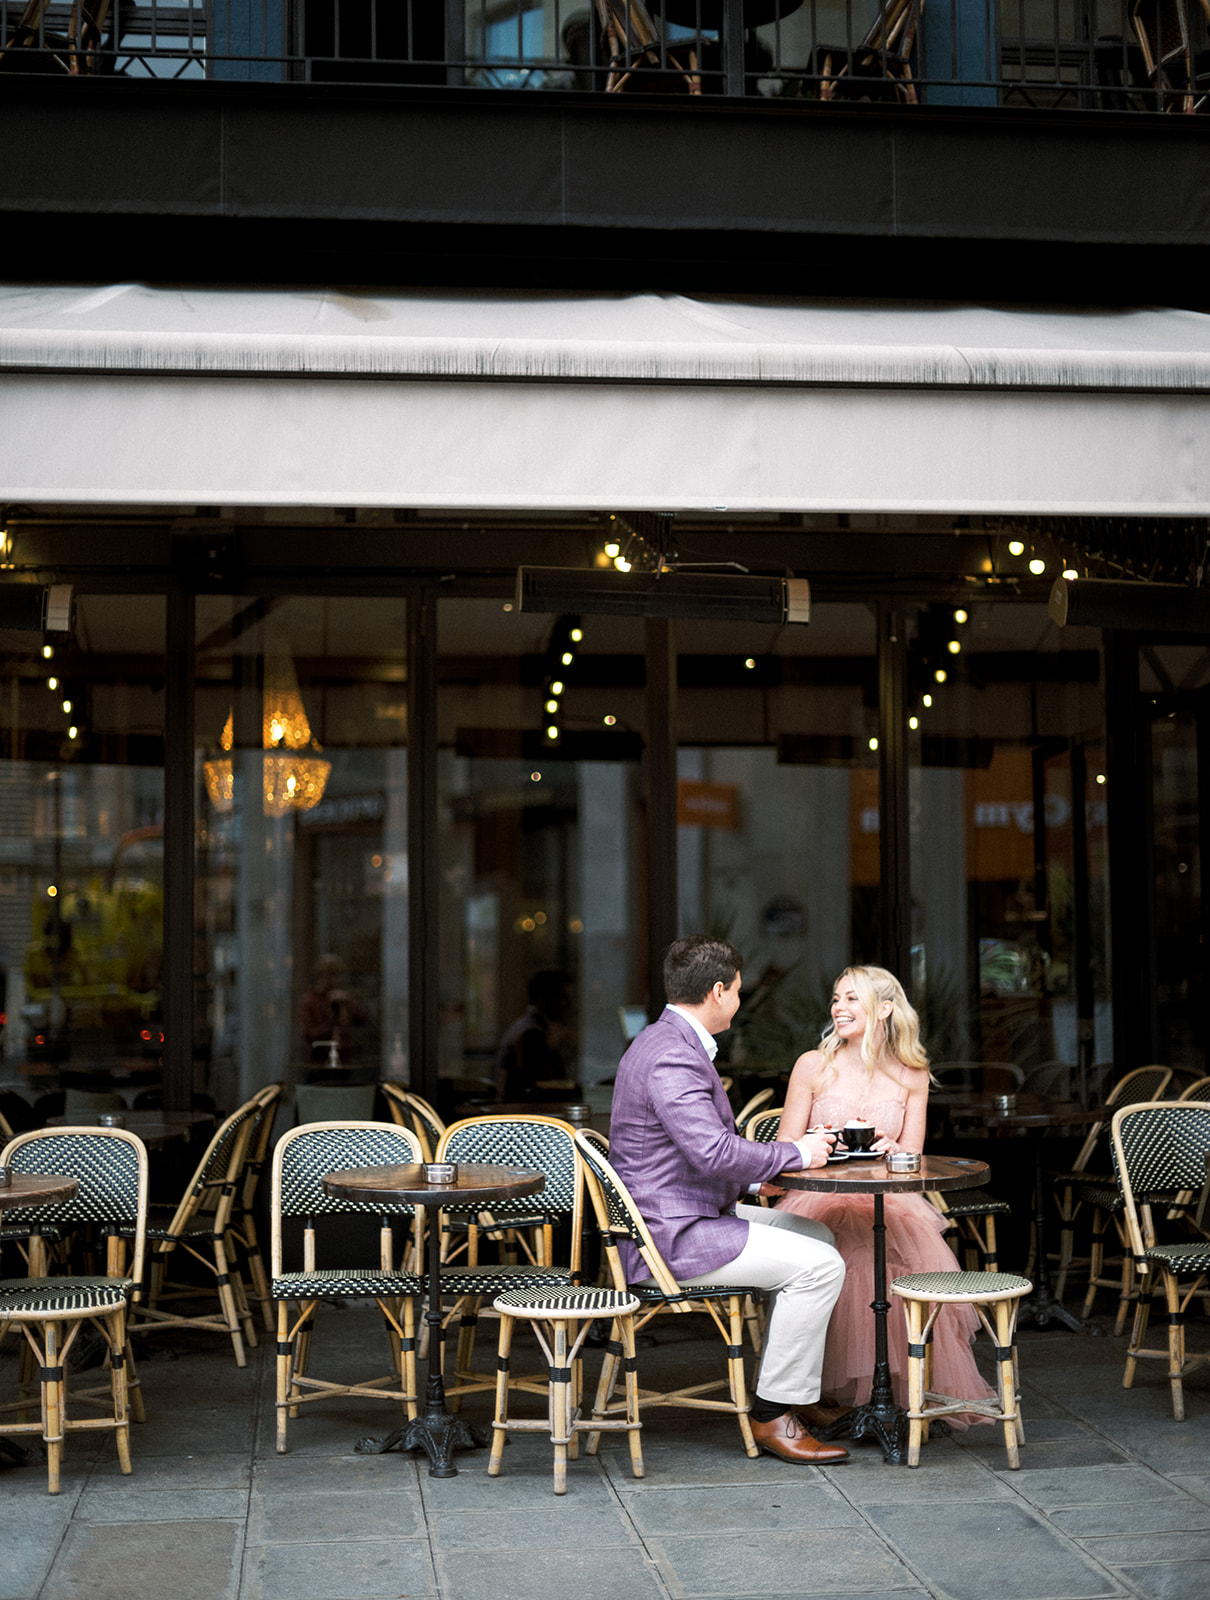 Couple sitting outside of cafe in Paris.